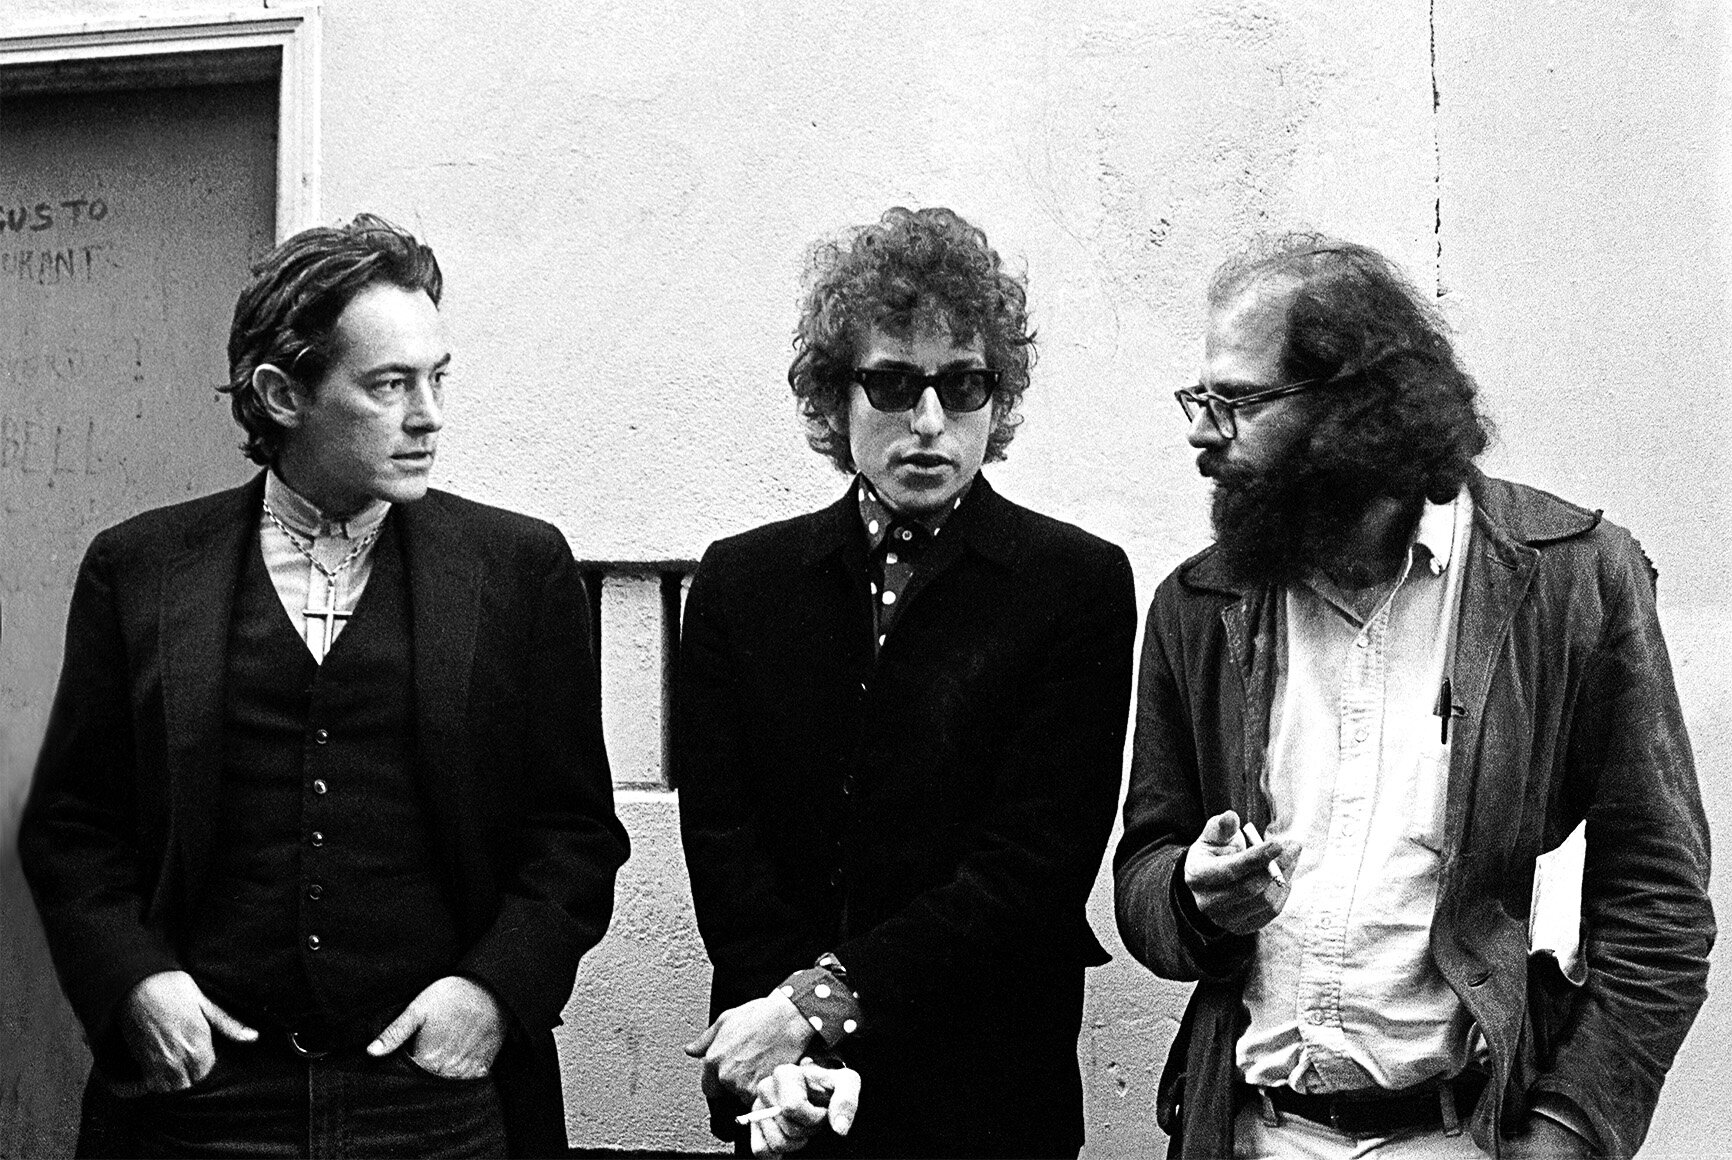 Larry Keenan Photography Photos From The Beat Generation Allen Ginsberg Bob Dylan Michael Mcclure North Beach San Francisco 60s